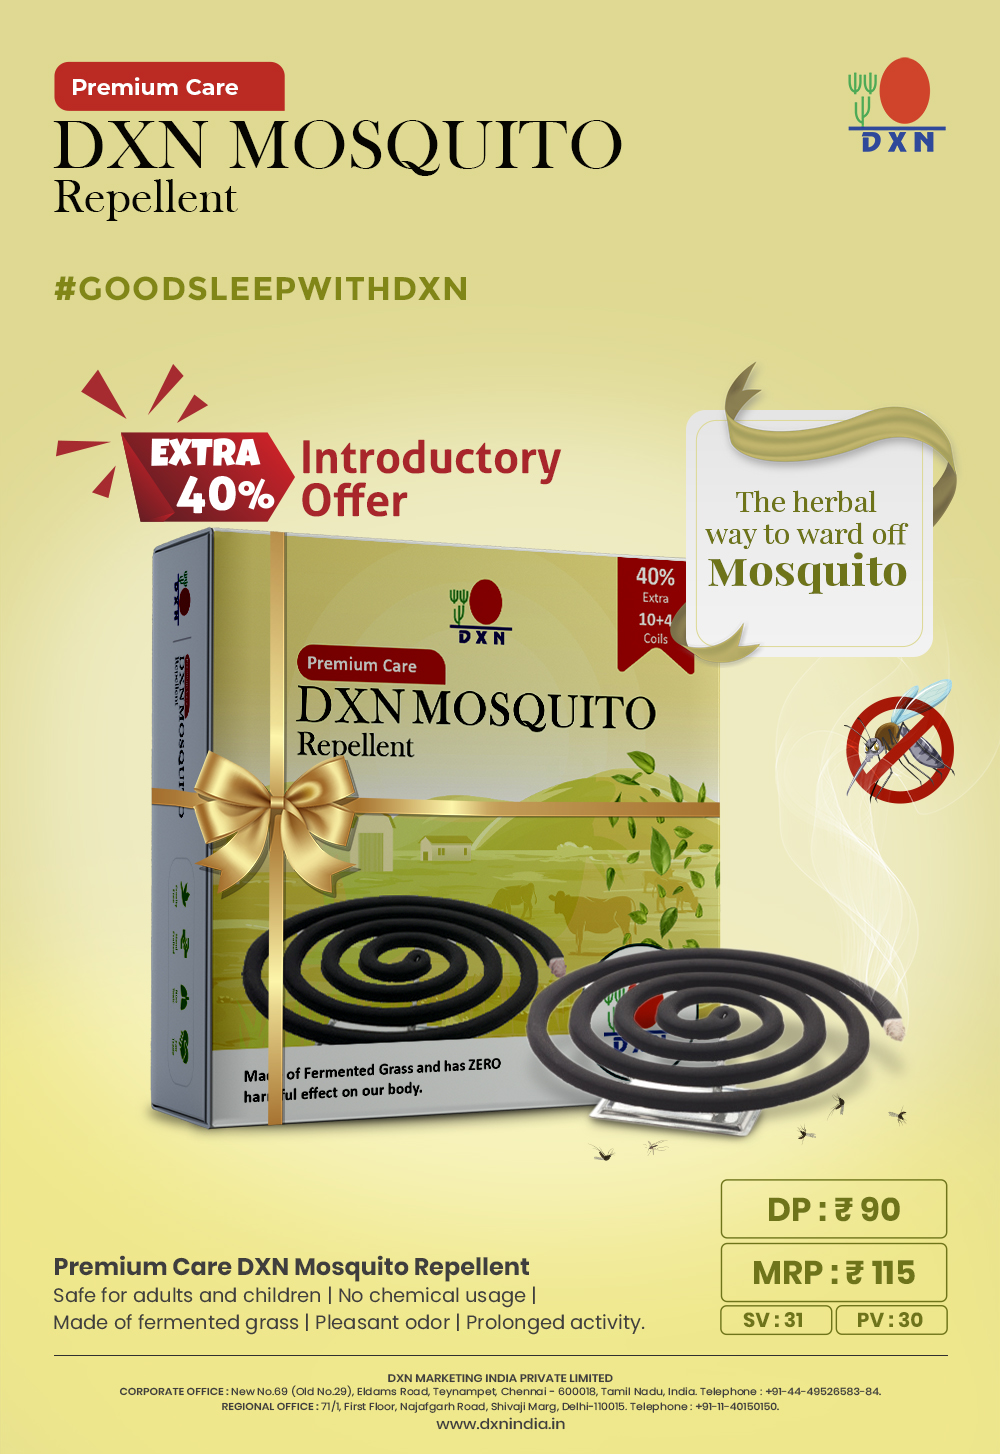 DXN Mosquito Repellent